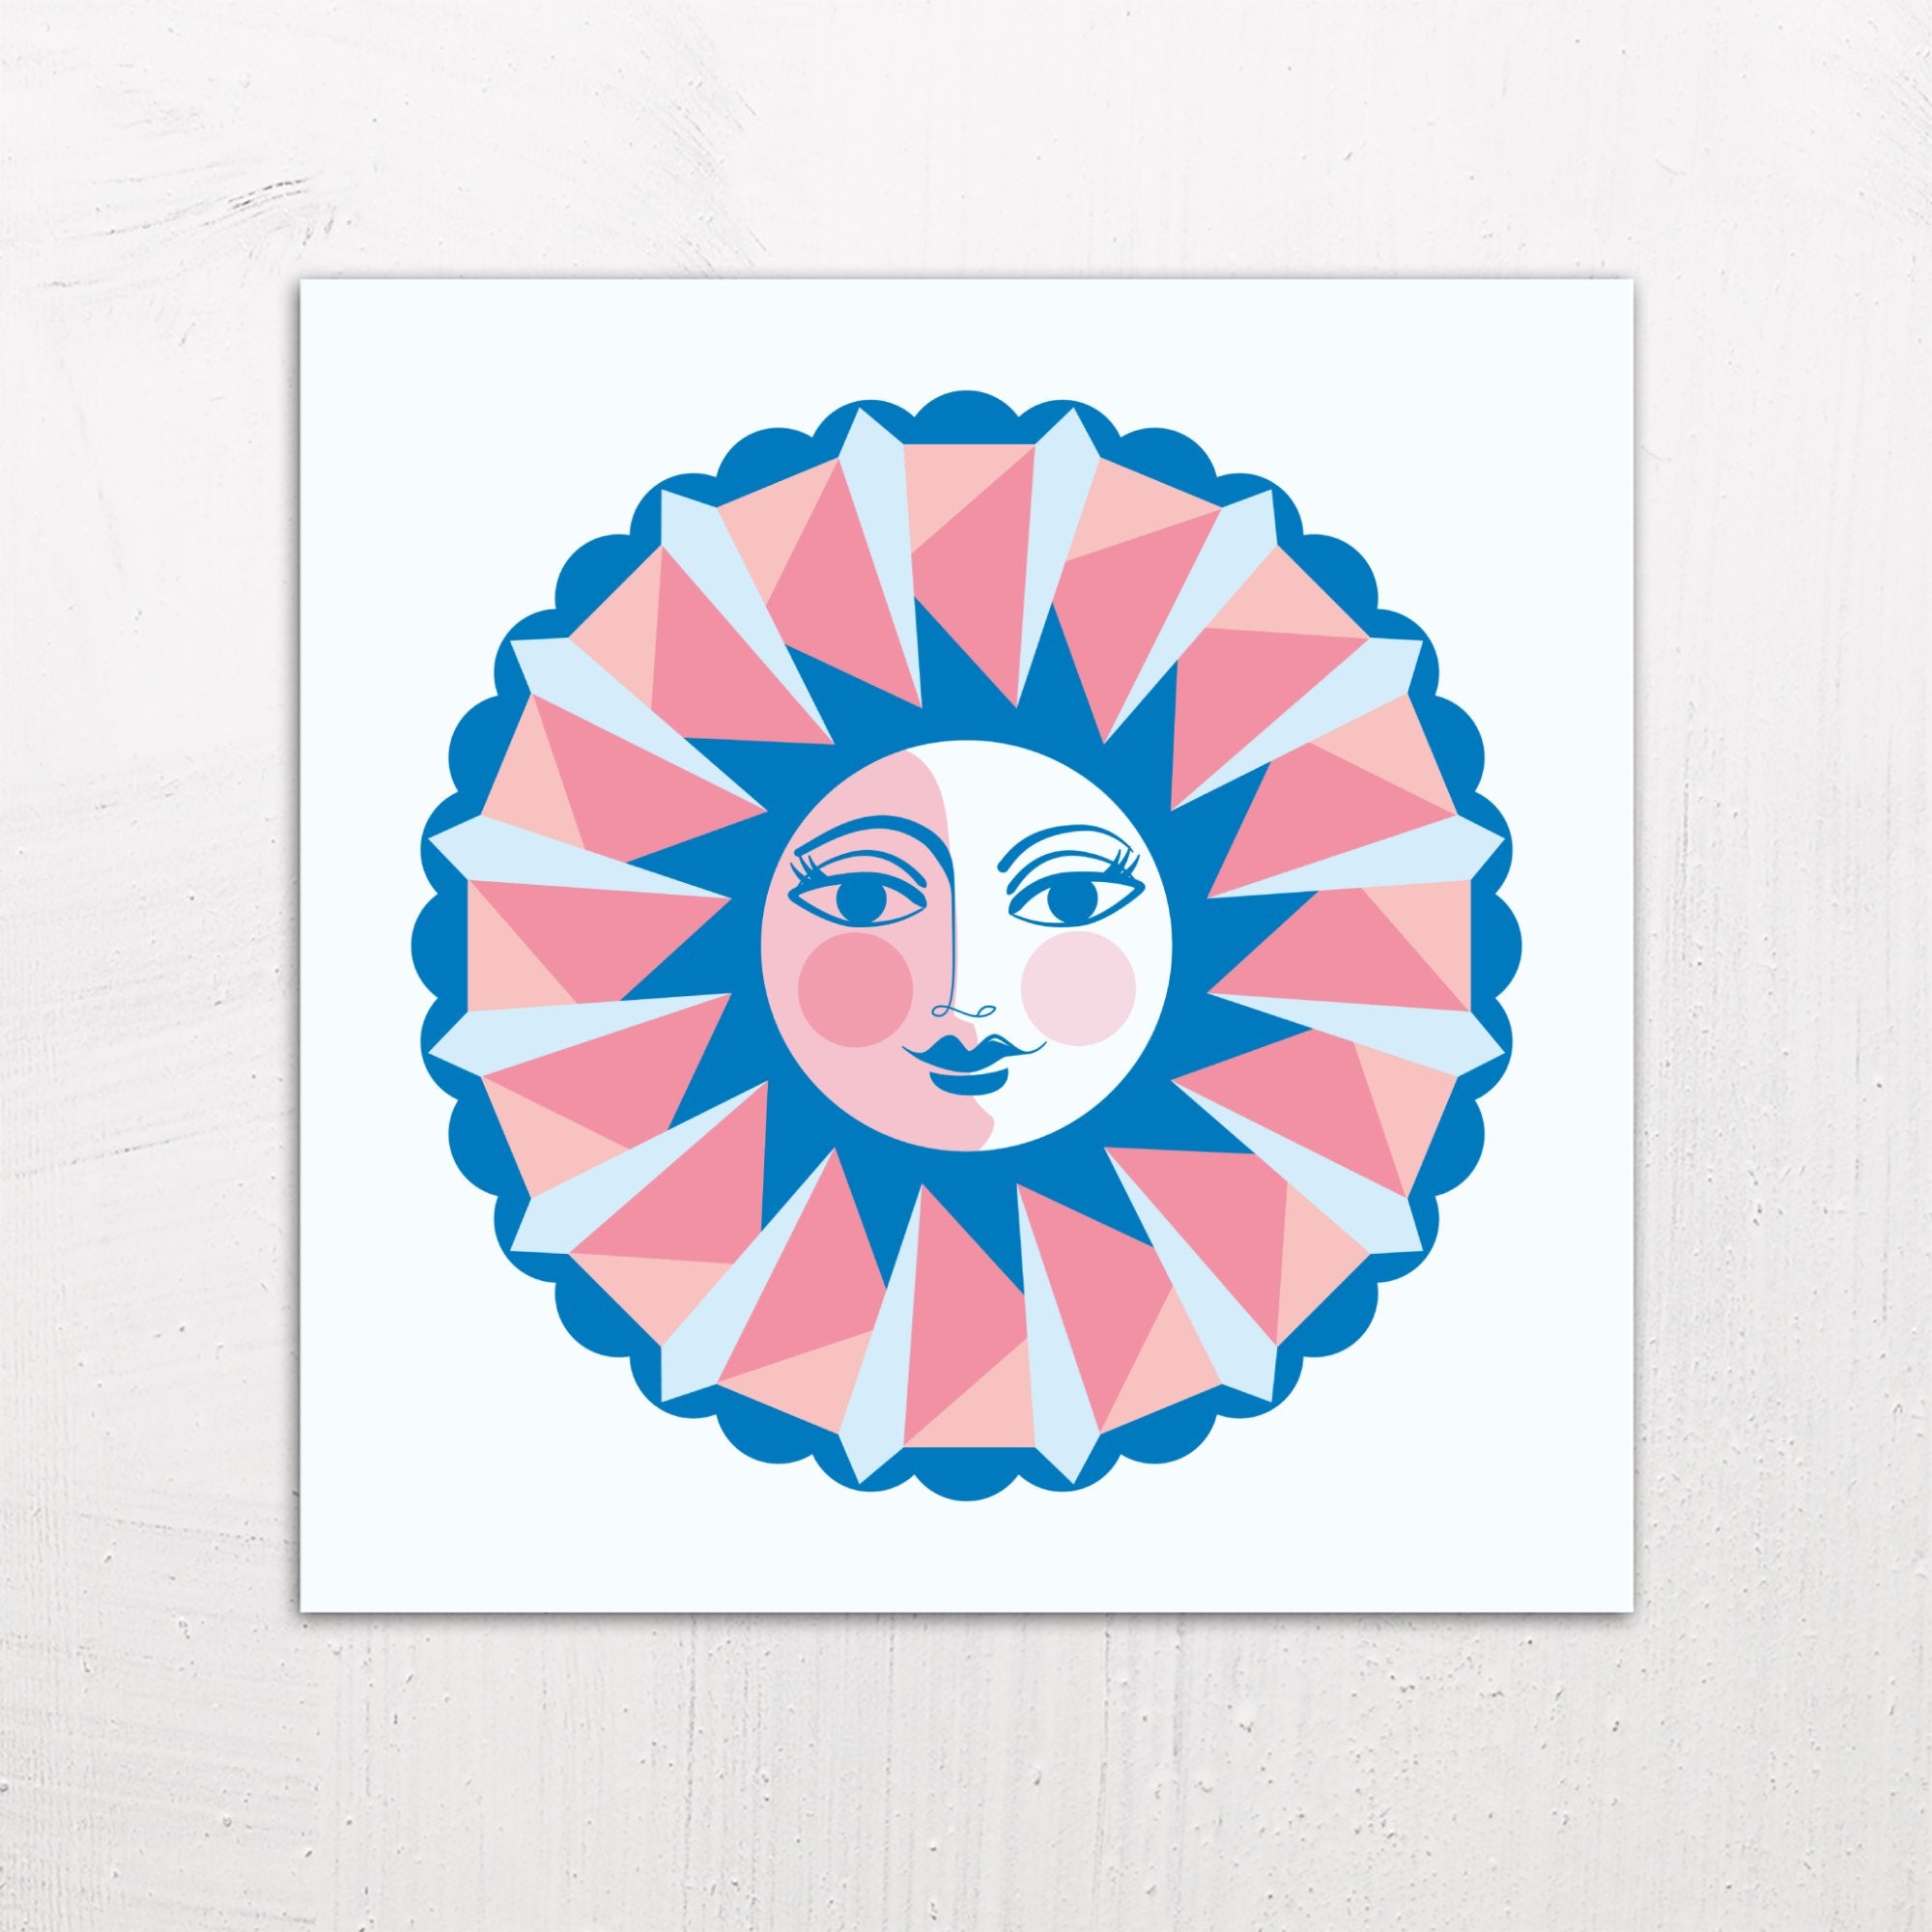 A large size metal art poster display plate with printed design of a Sun Face Design